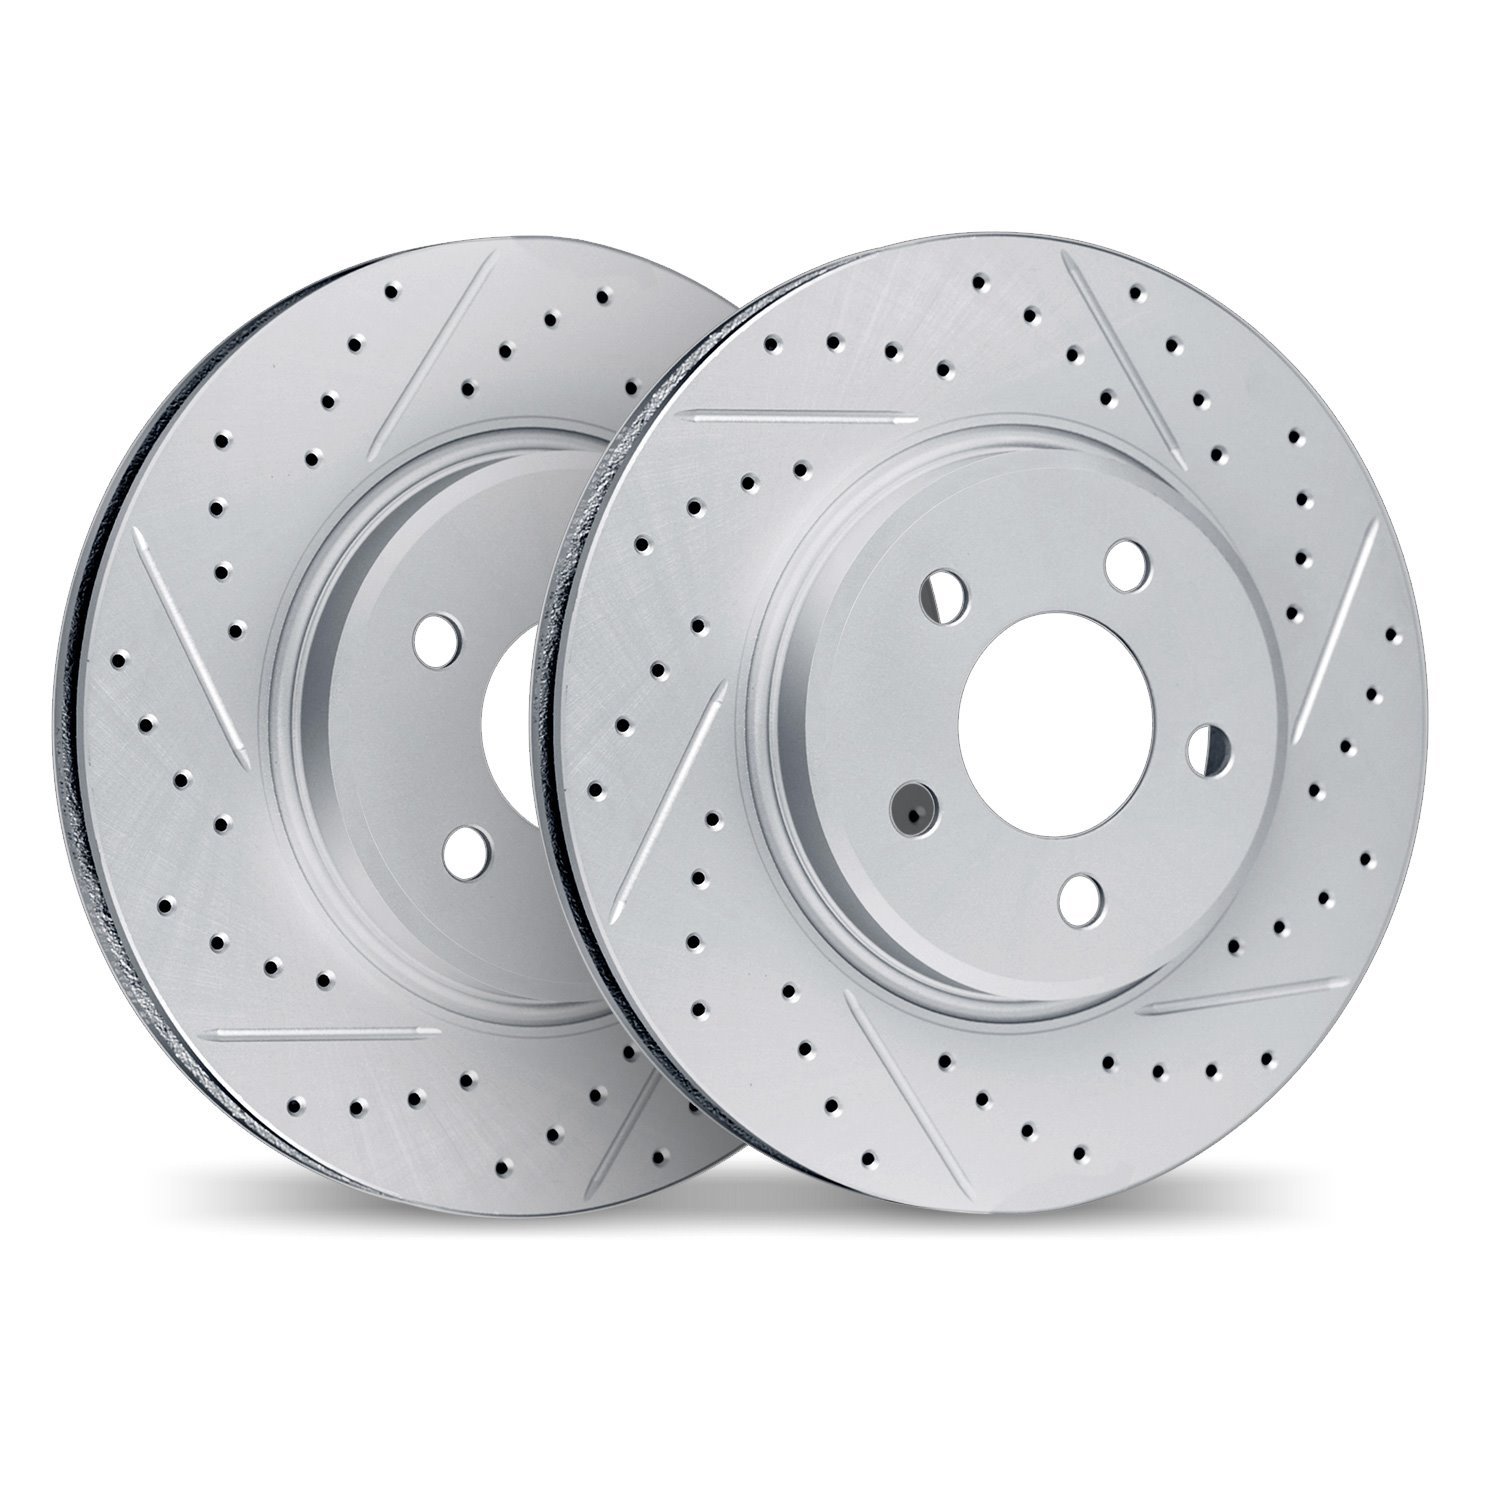 2002-13026 Geoperformance Drilled/Slotted Brake Rotors, Fits Select Subaru, Position: Rear